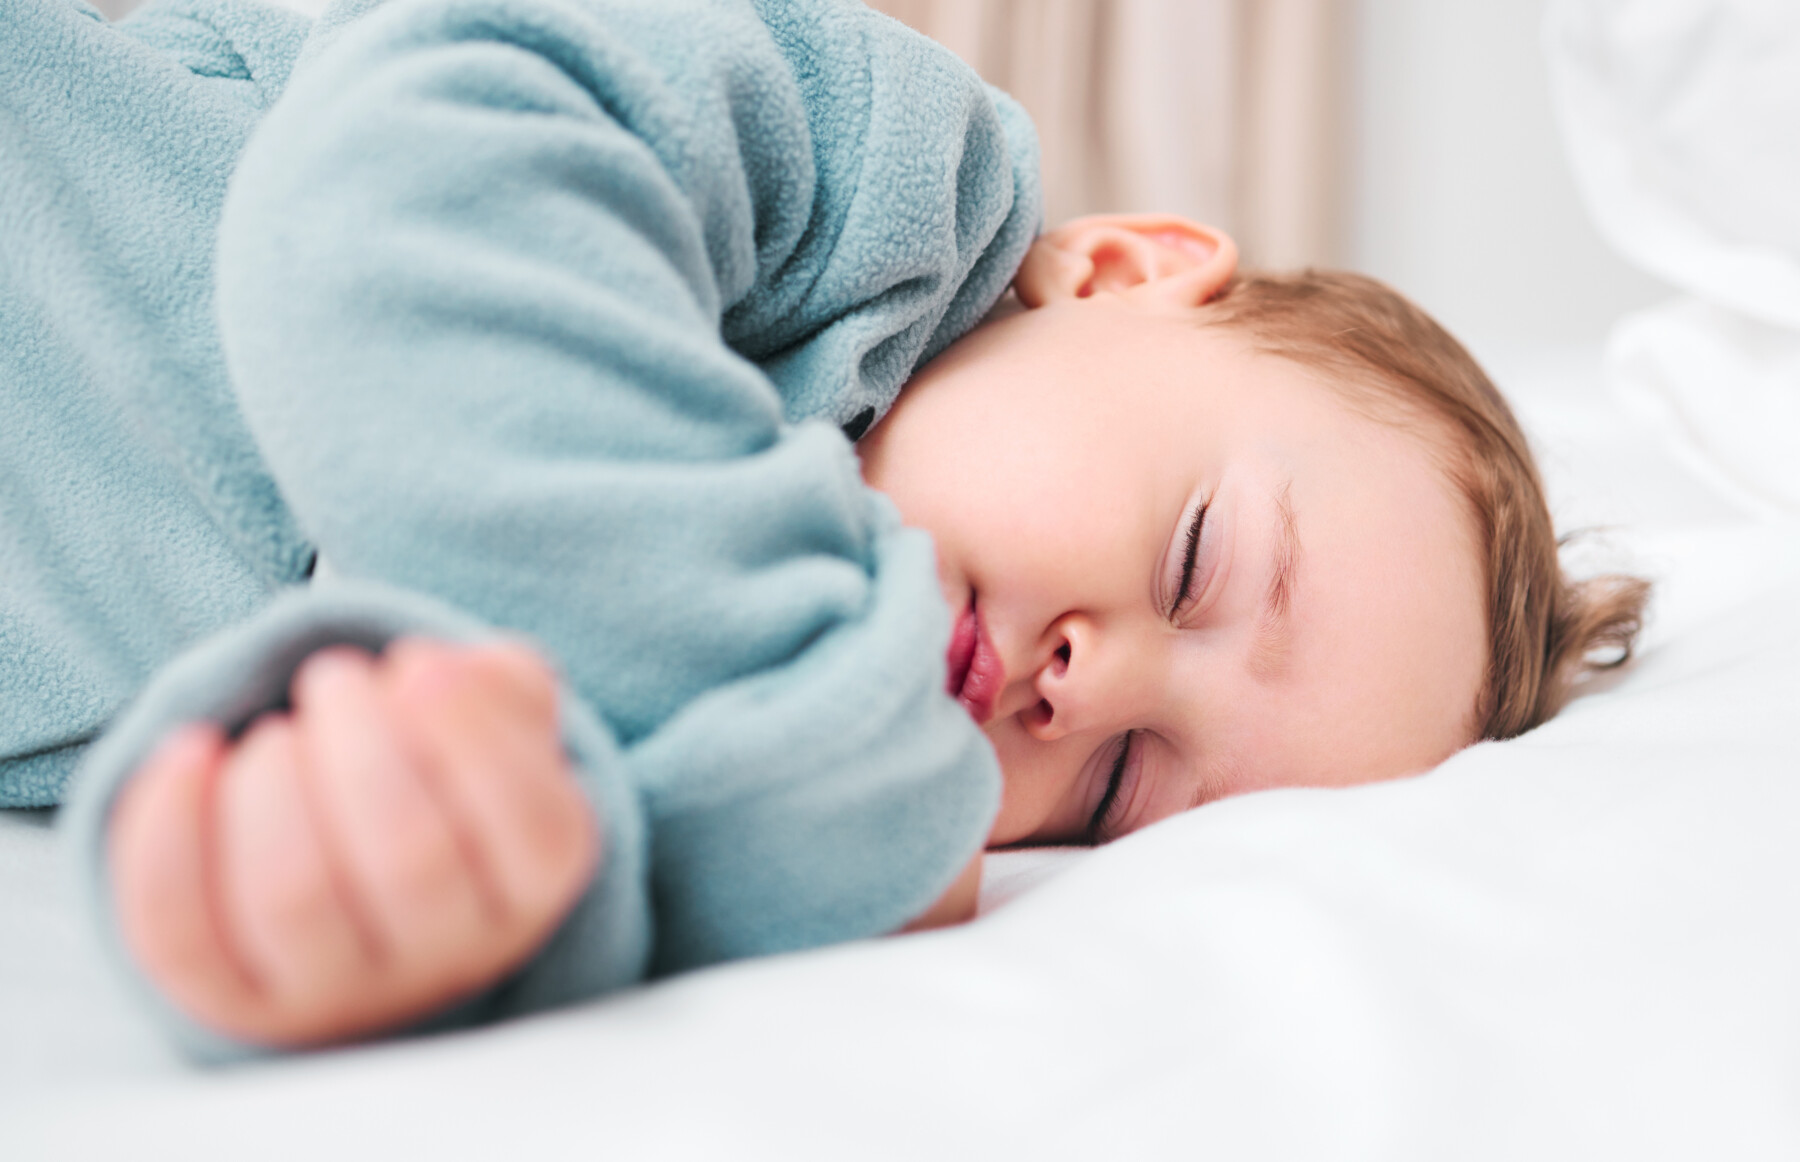 Choosing a Sleep Training Method That’s Right for You and Your Child